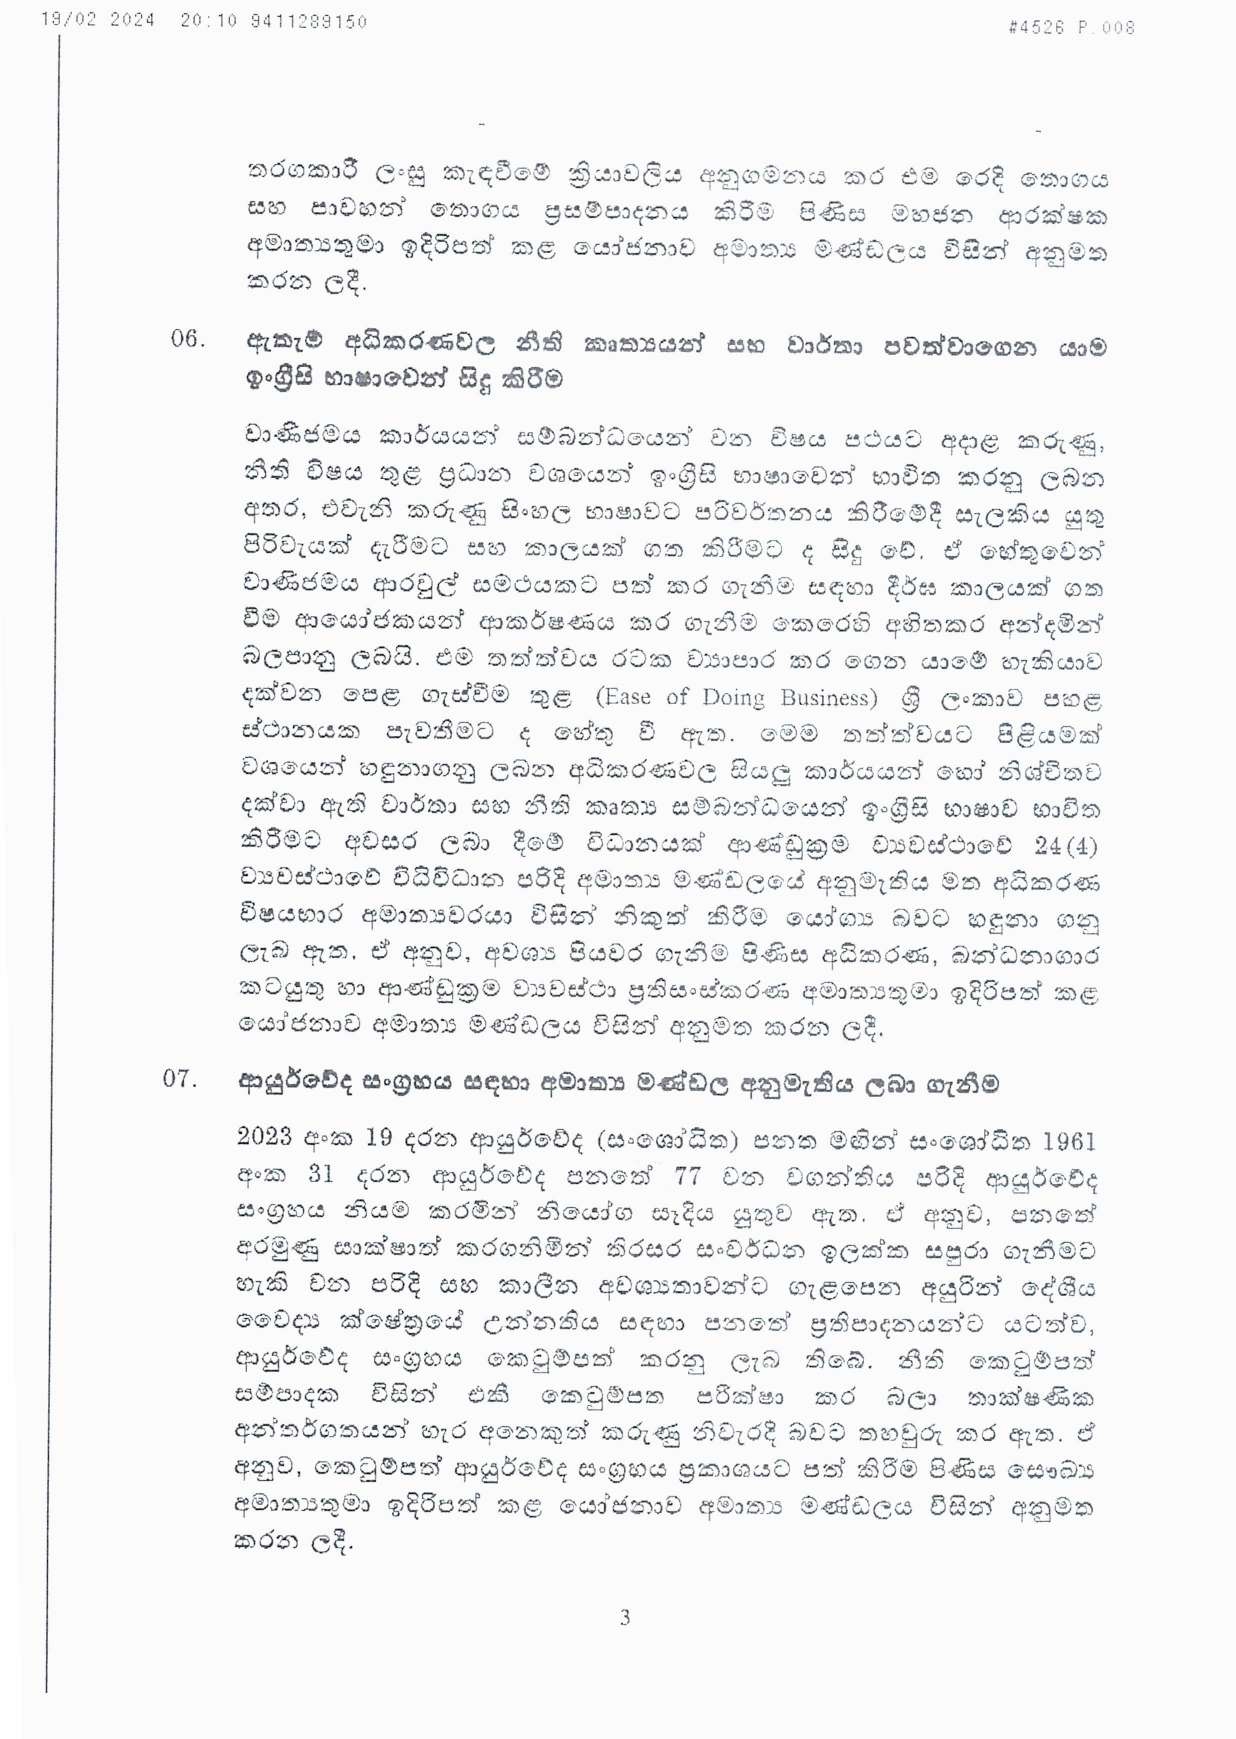 Cabinet Decisions on 19.02.2024 Merged 1 page 00031